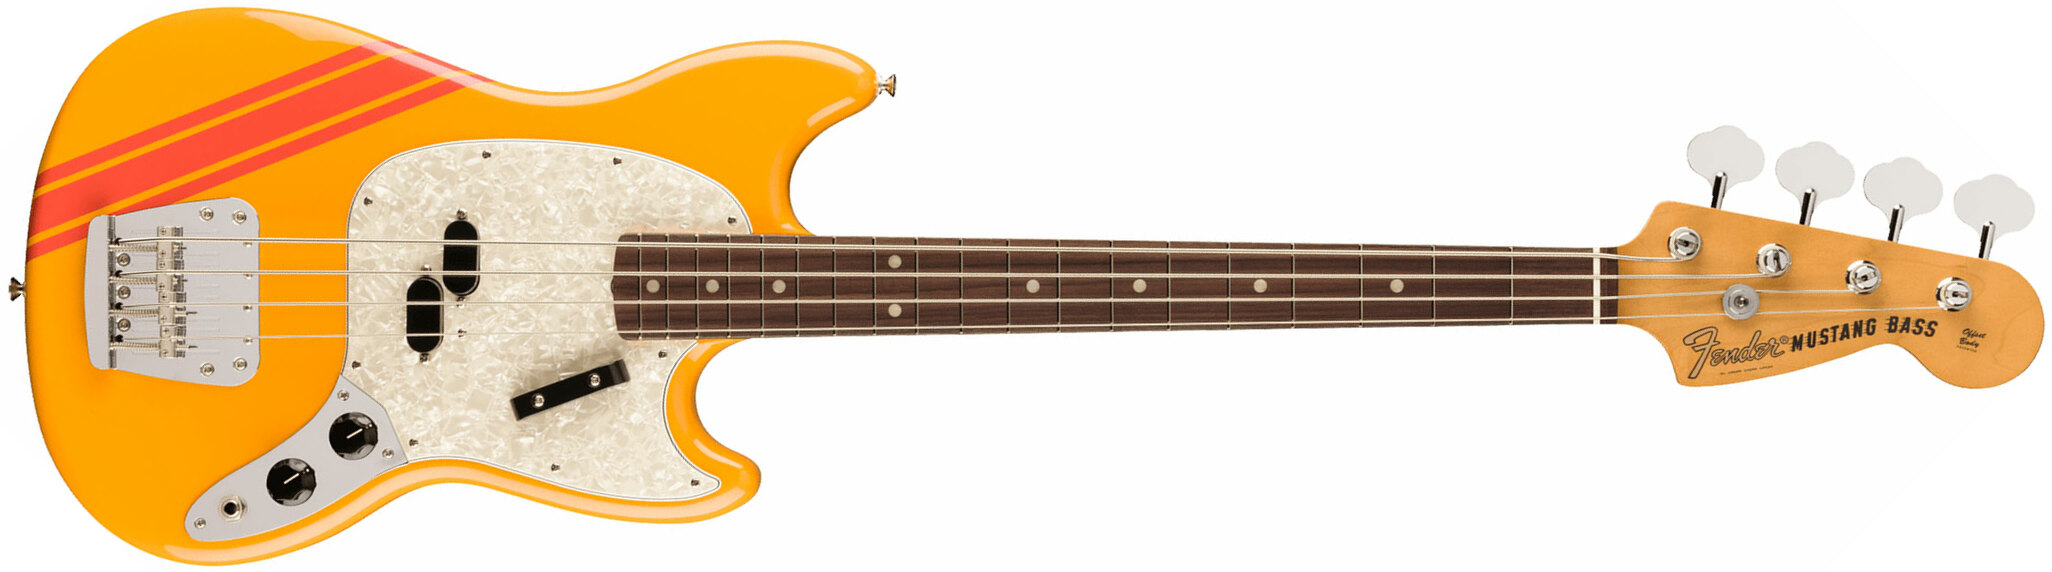 Fender Mustang Bass 70s Competition Vintera 2 Rw - Competition Orange - Solid body elektrische bas - Main picture